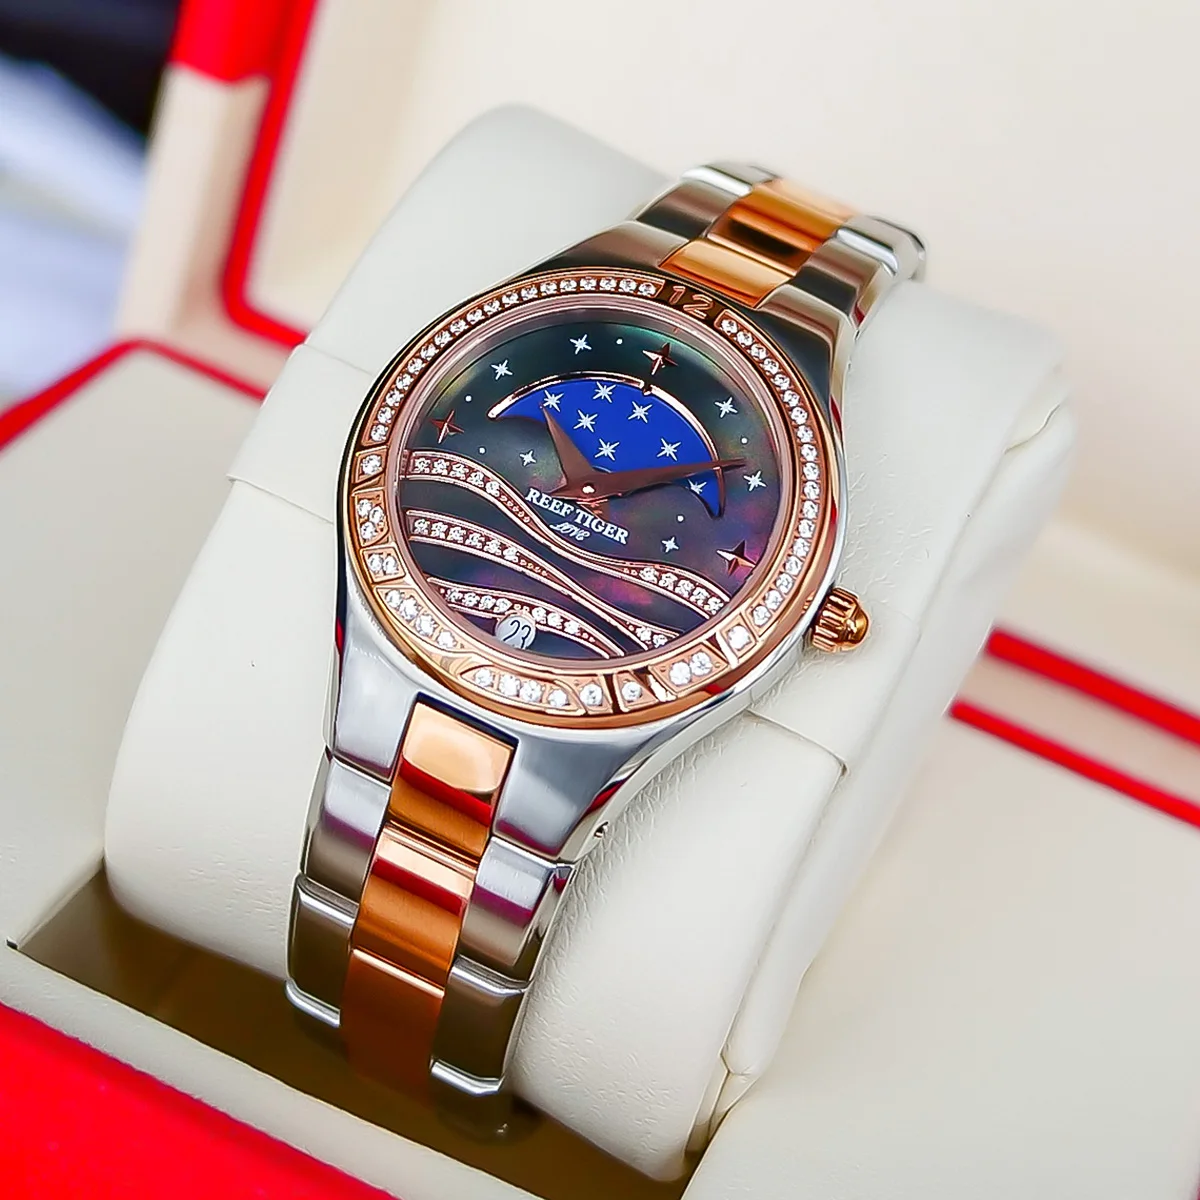 

Reef Tiger/RT Luxury Women's Watches with Moon Phase Date Watch Diamonds Bezel Rose Gold Two Tone Wrist Watches RGA1524